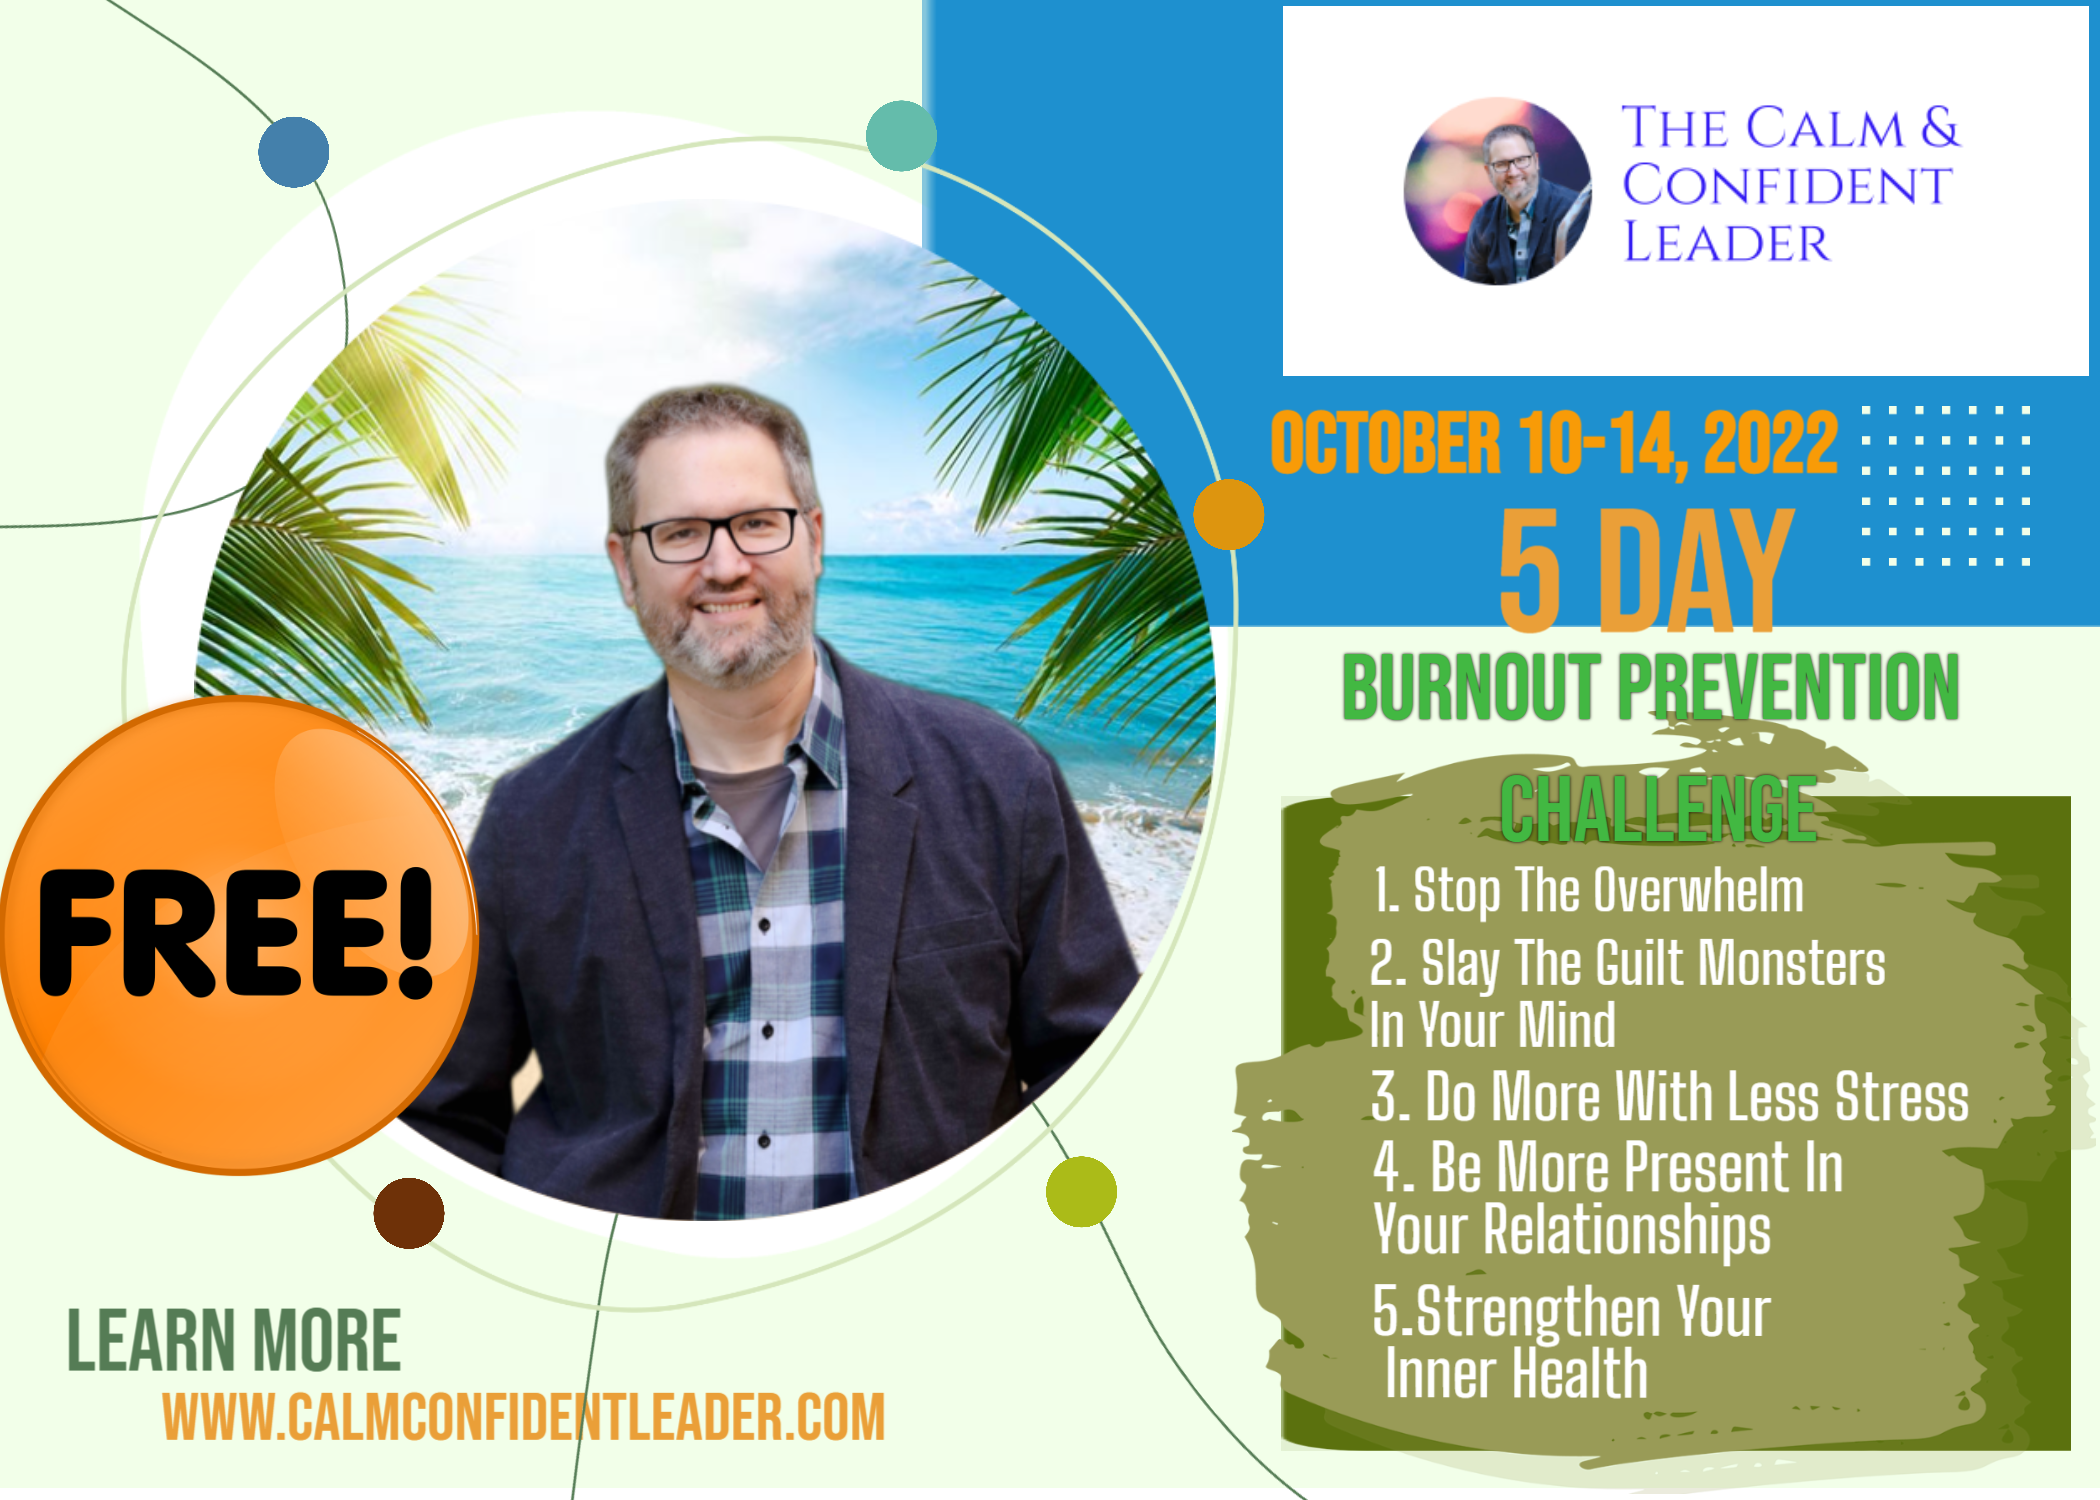 Sign Up For The Free 5 Day Challenge